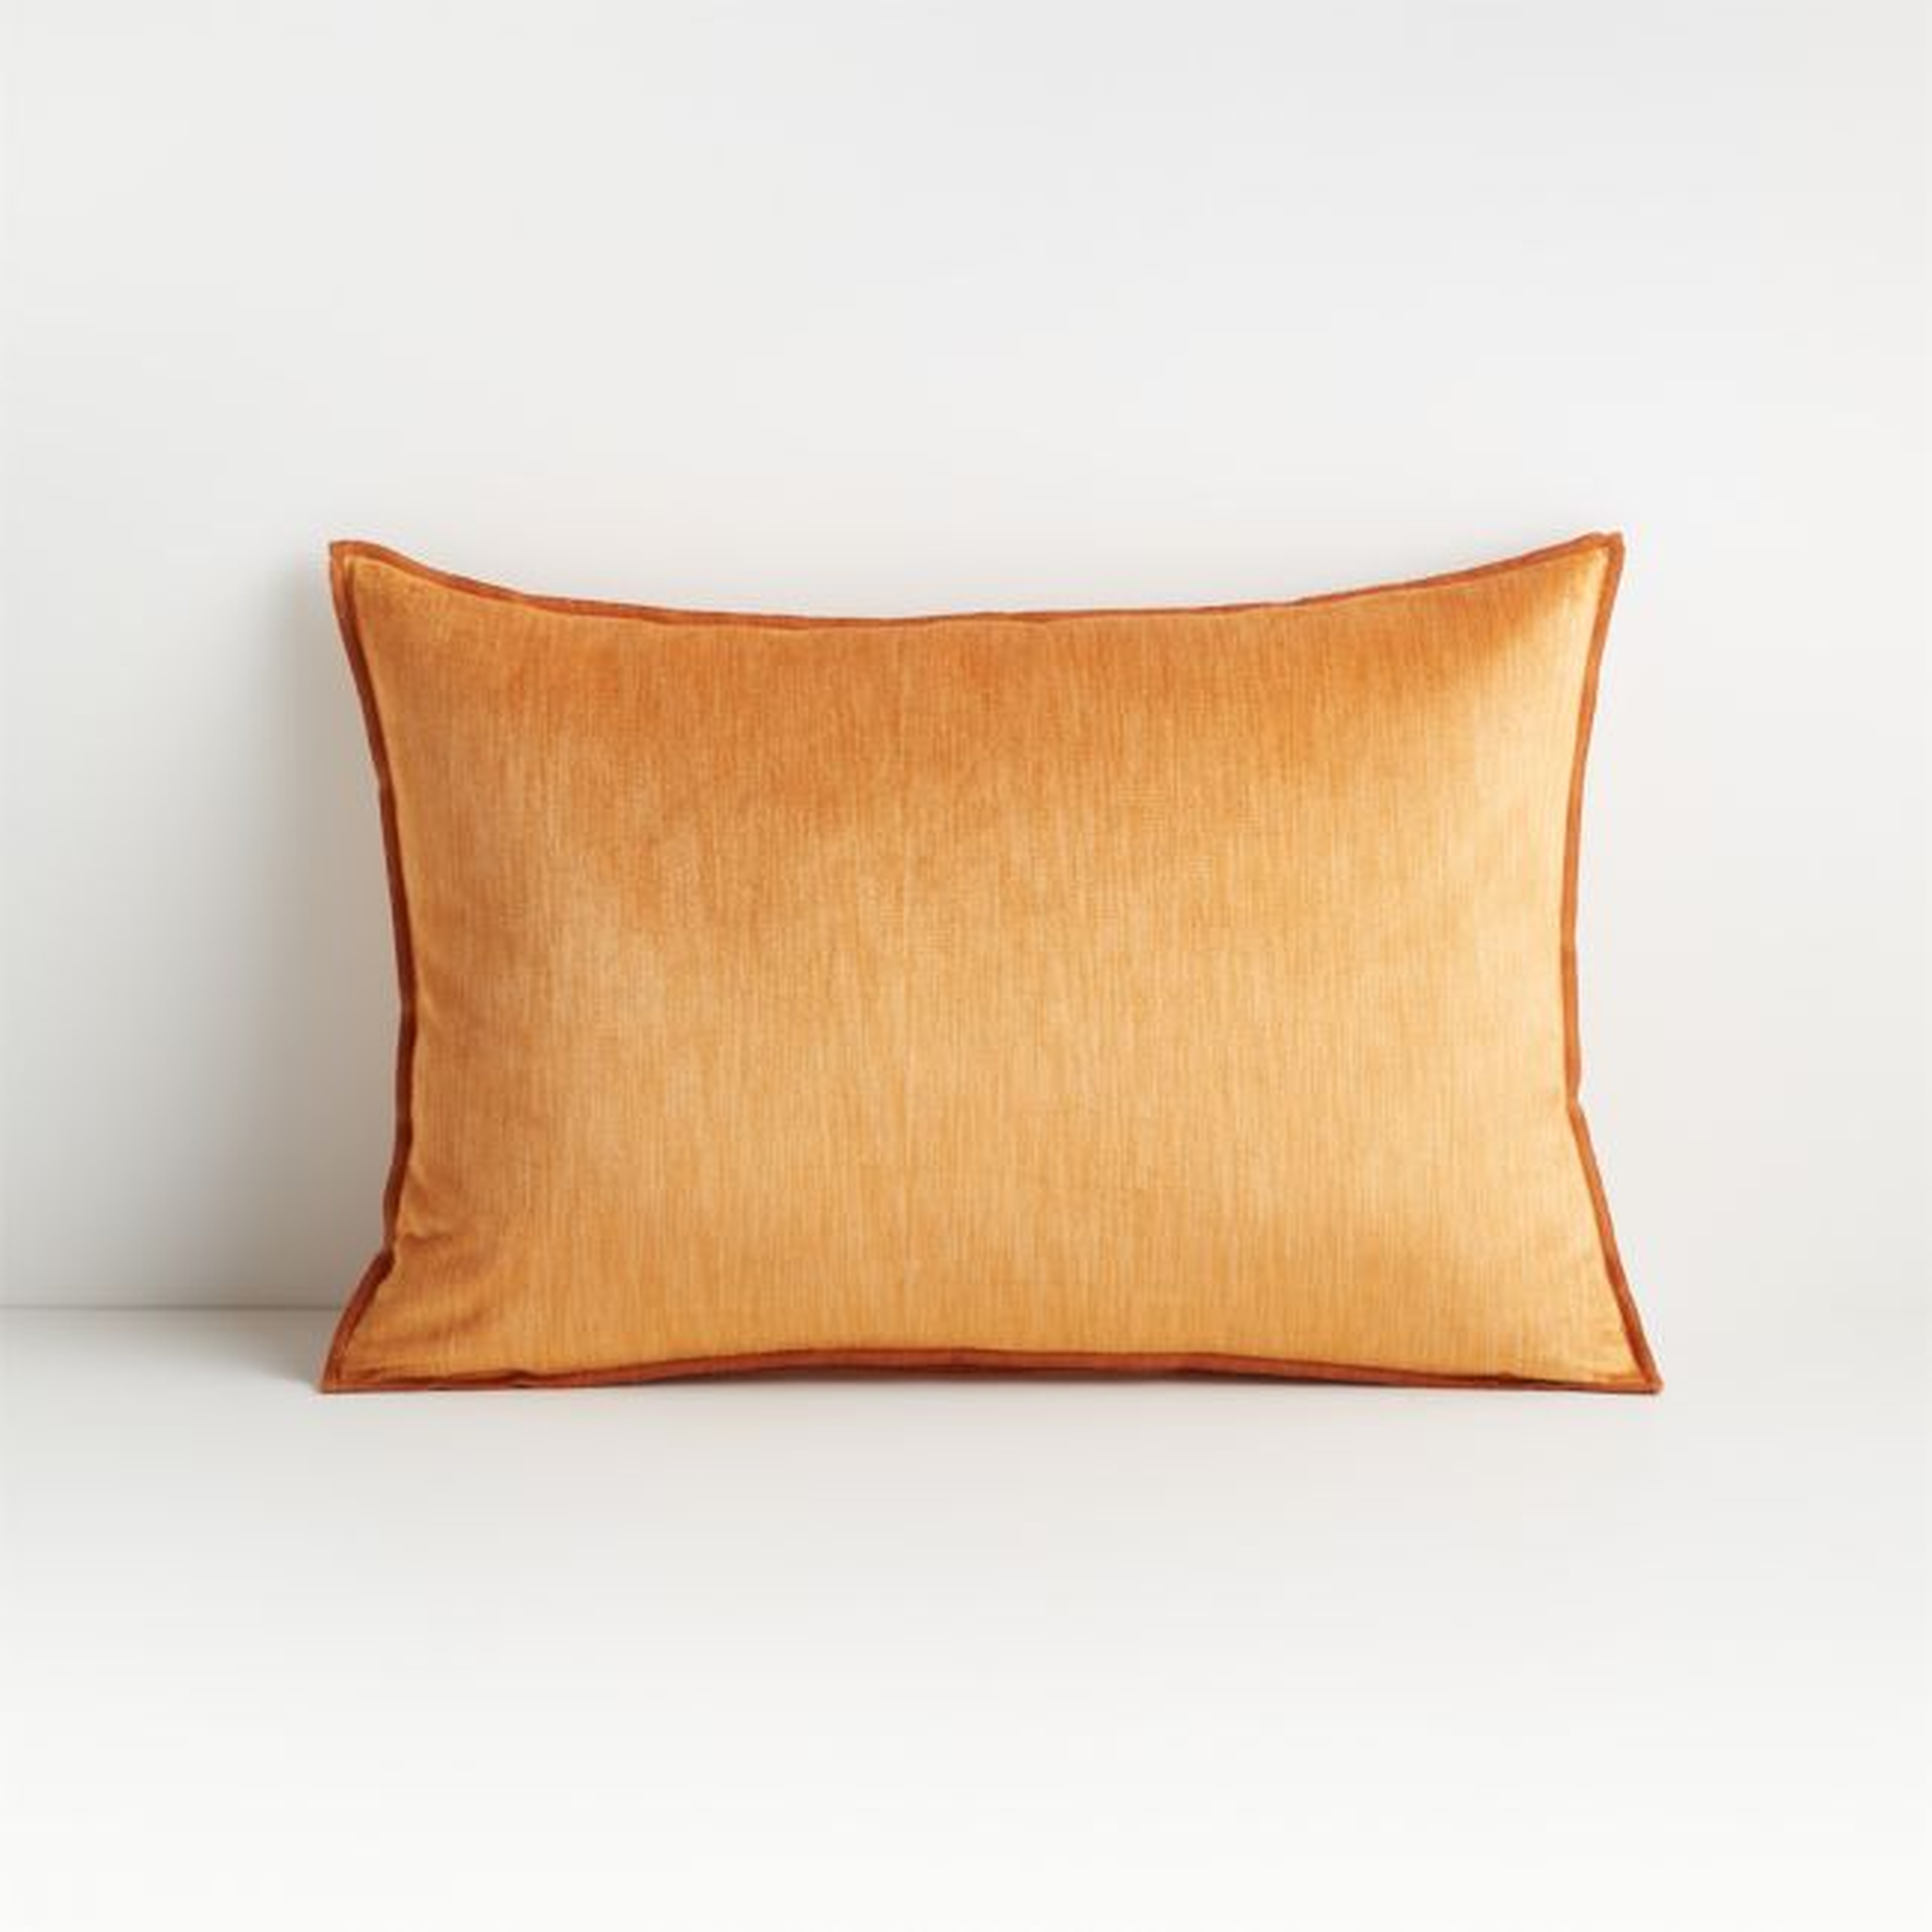 Styria Amber 22"x15" Pillow with Down-Alternative Insert - Crate and Barrel